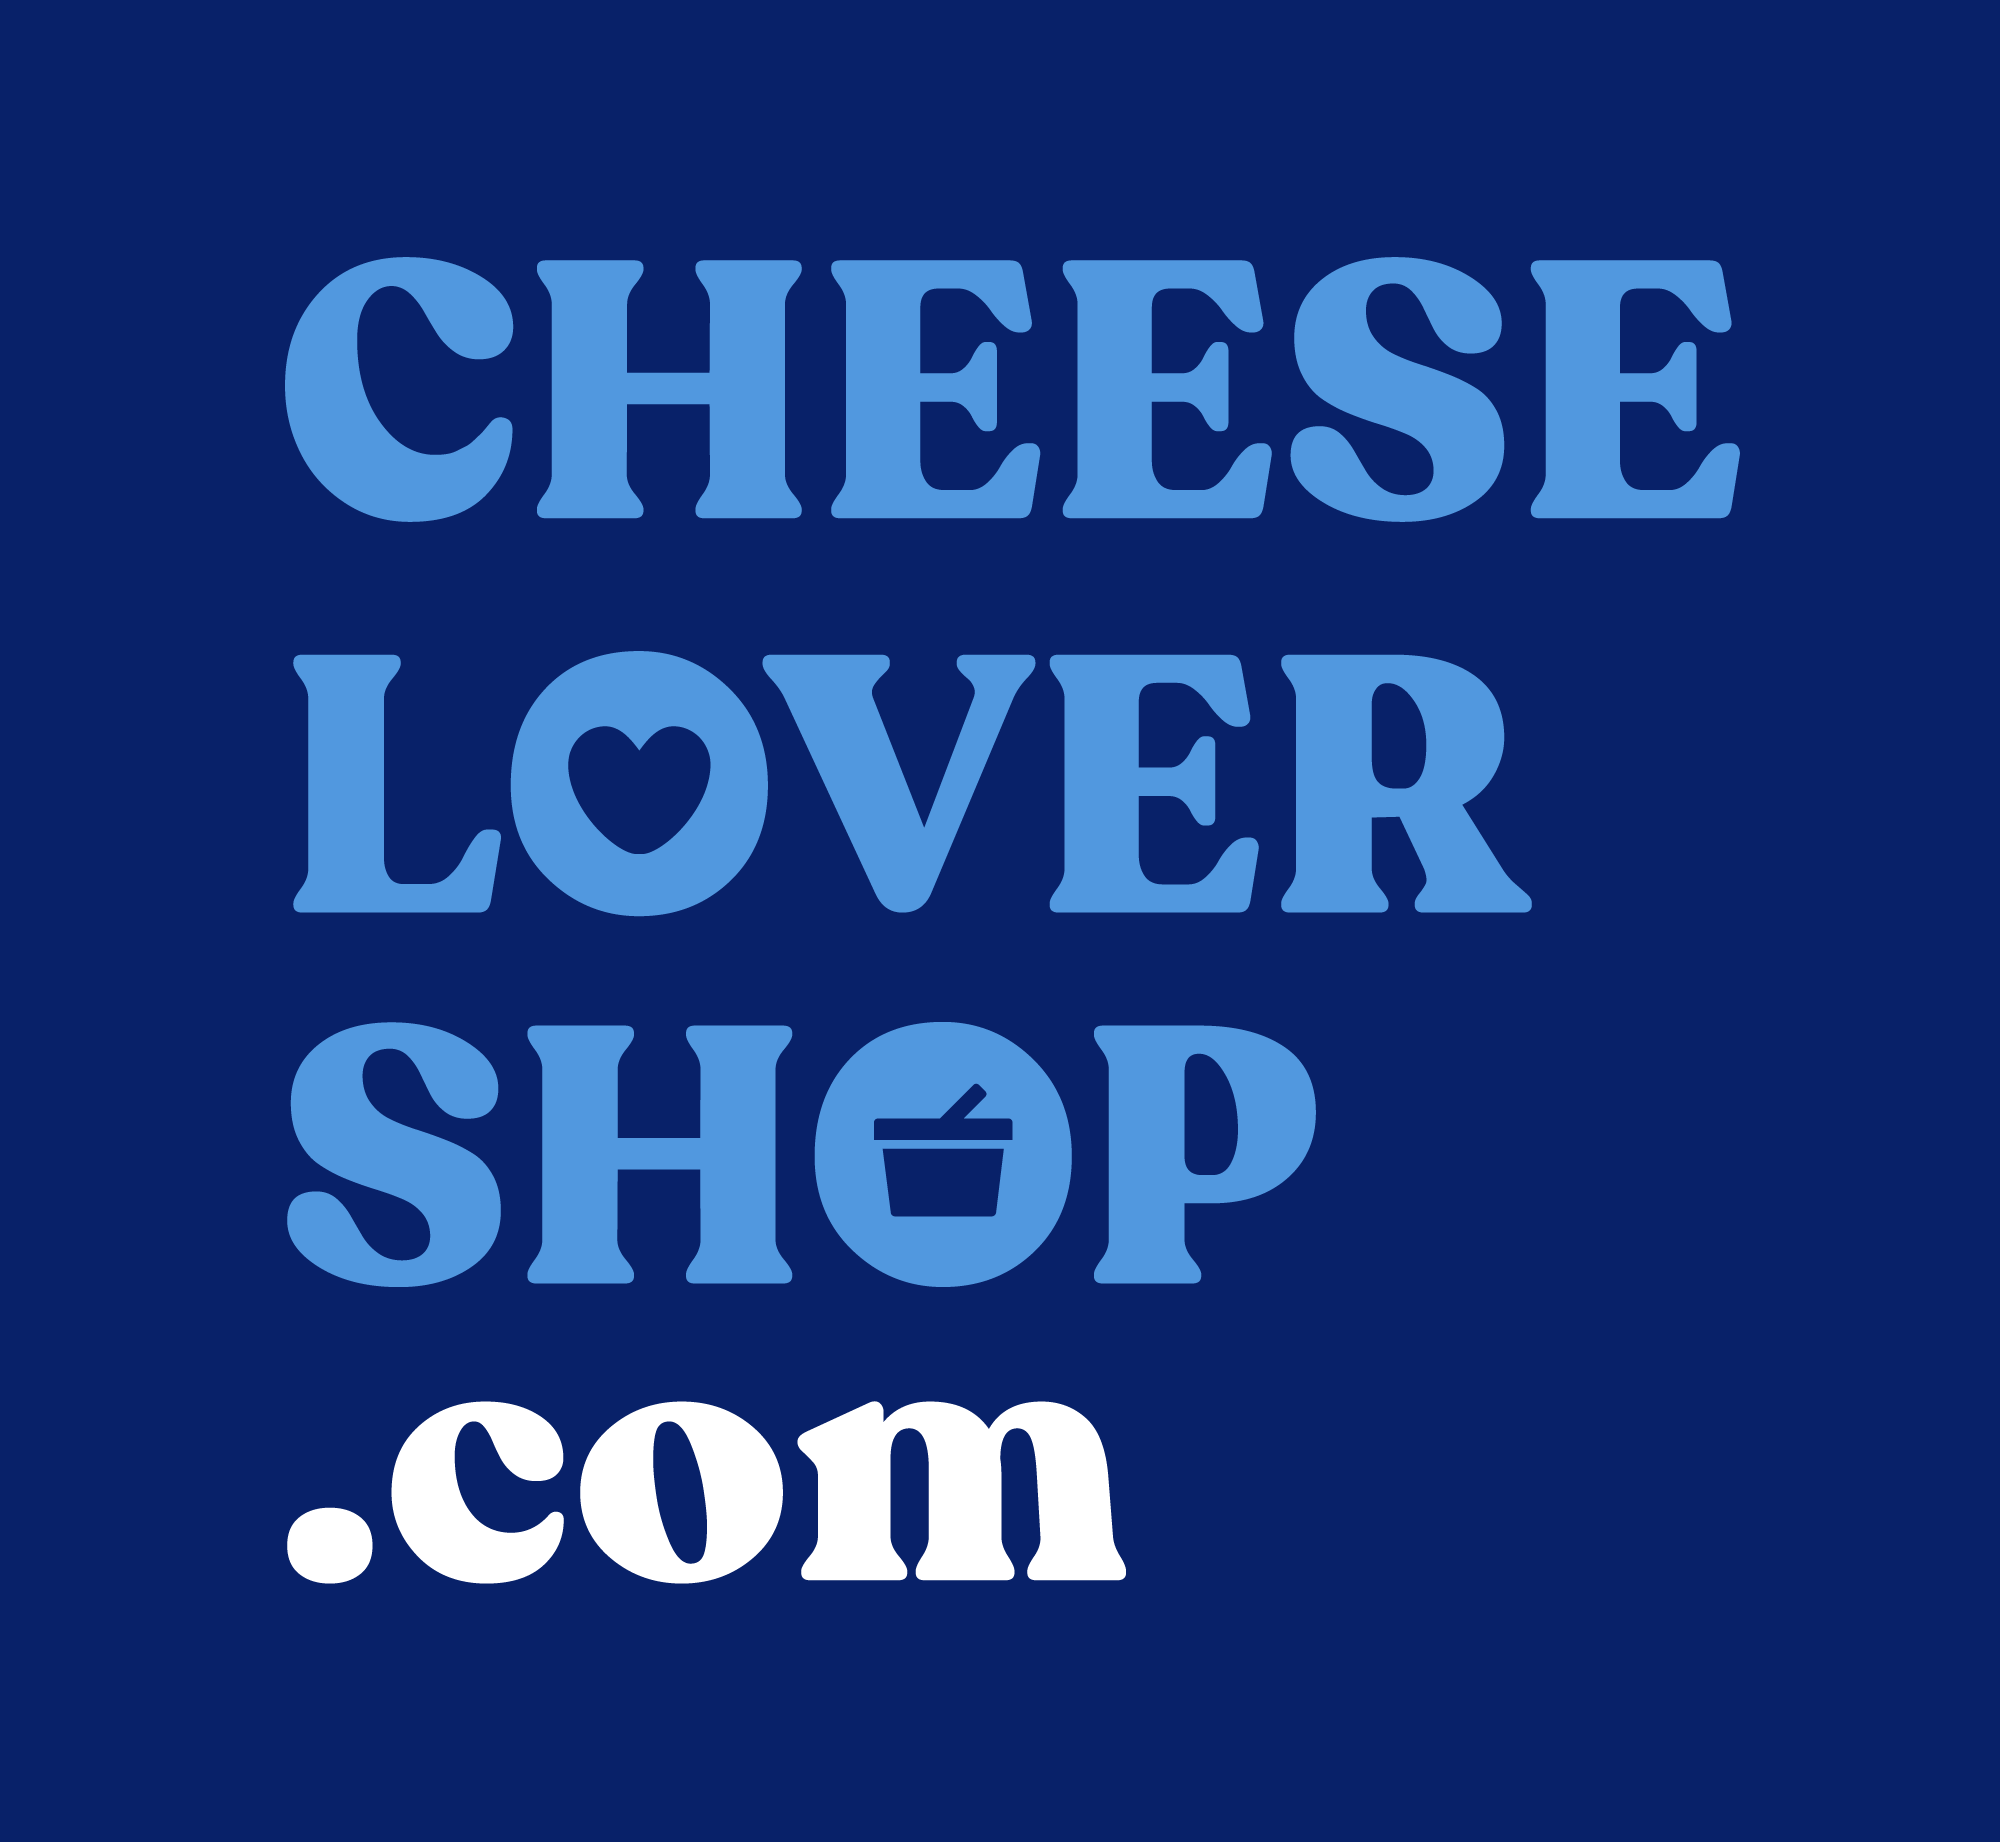 Savencia Cheese USA Launches CheeseLoverShop.com, a One-Stop-Shop for Premium Cheeses